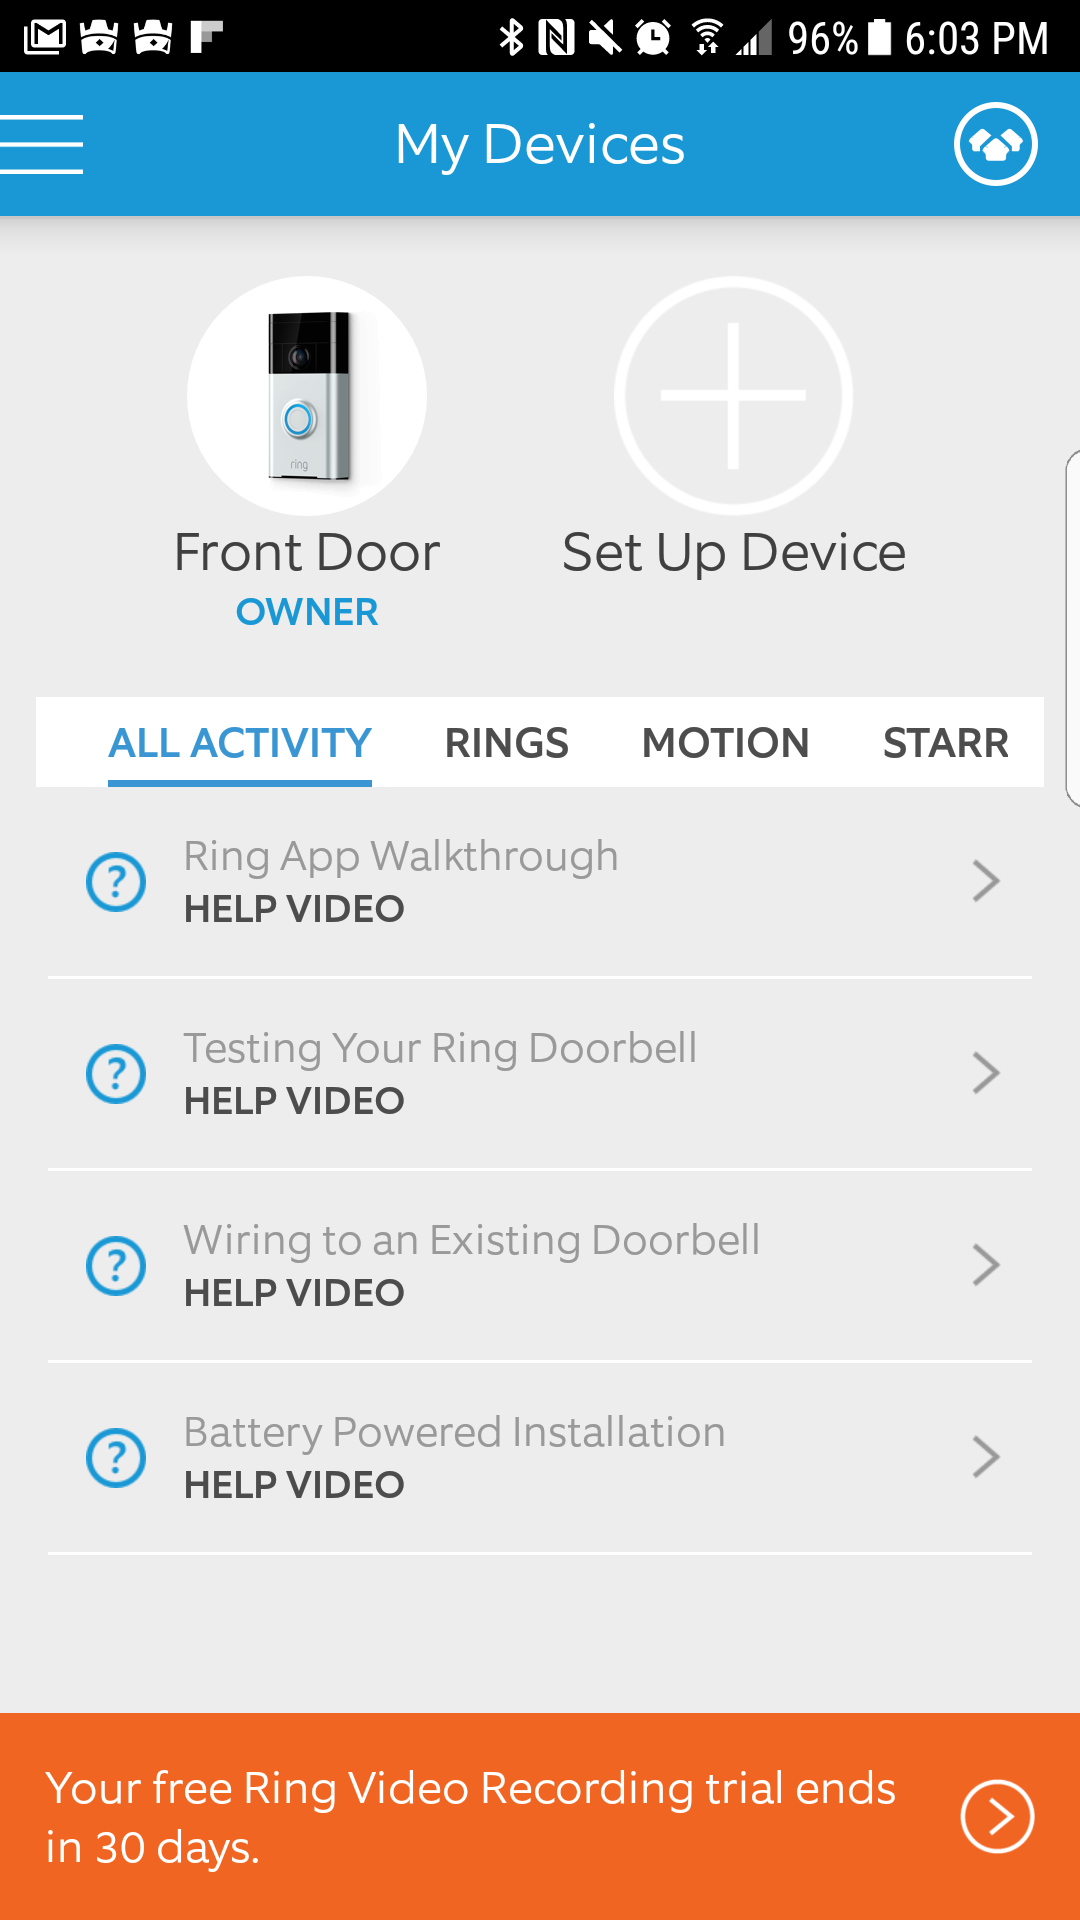 When setup is completed, you are finally in the app. You have a nice selection of help videos to get you started. Notice your 30 day trial has started.